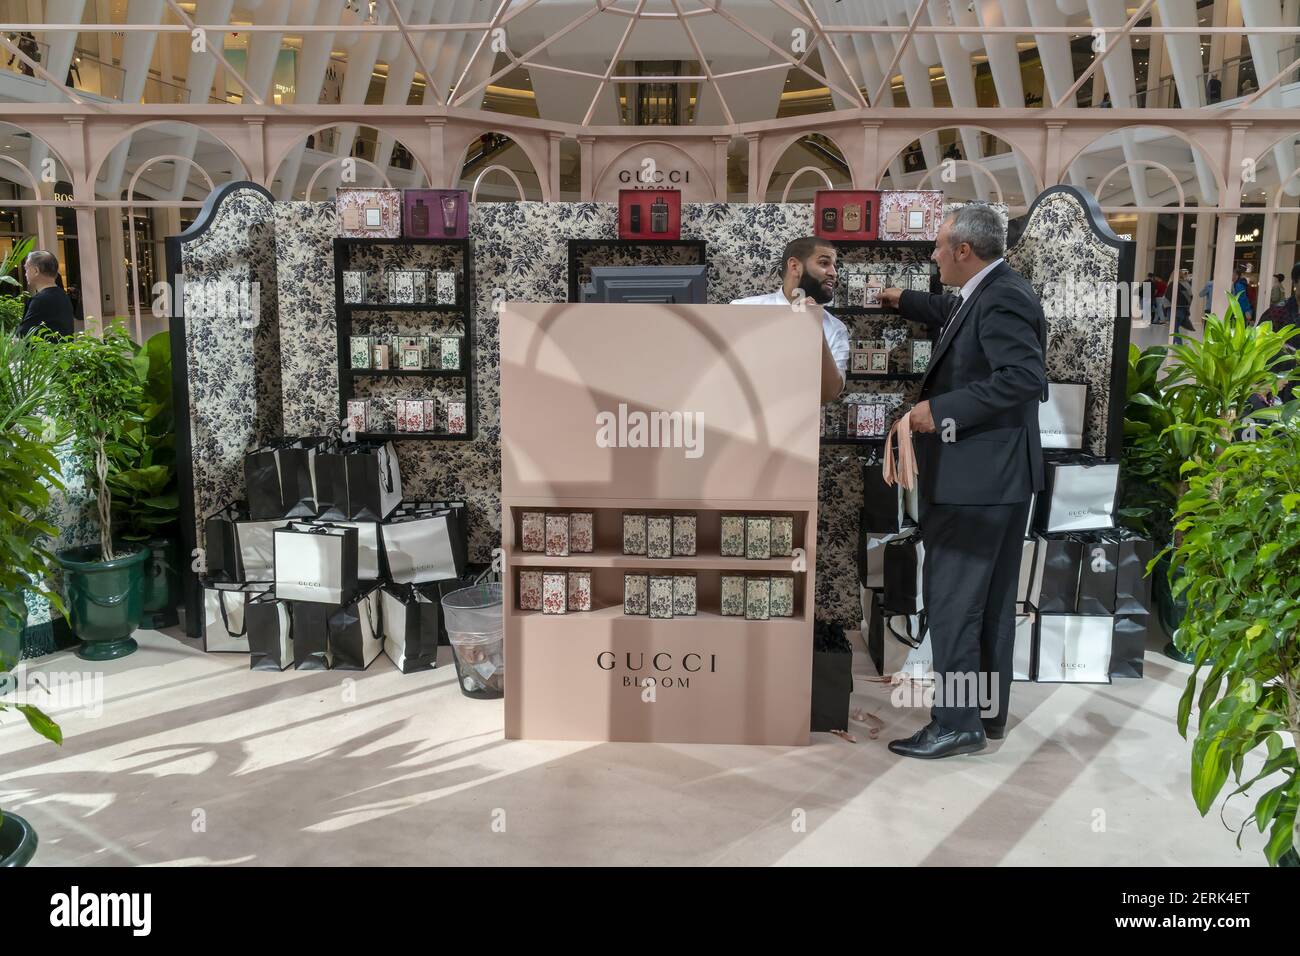 A branding event for the fragrance Gucci Bloom Nettare di Fiori attracts  visitors at the Oculus at the World Trade Center on Sunday, September 9,  2018. Coty, the licensee of the Gucci